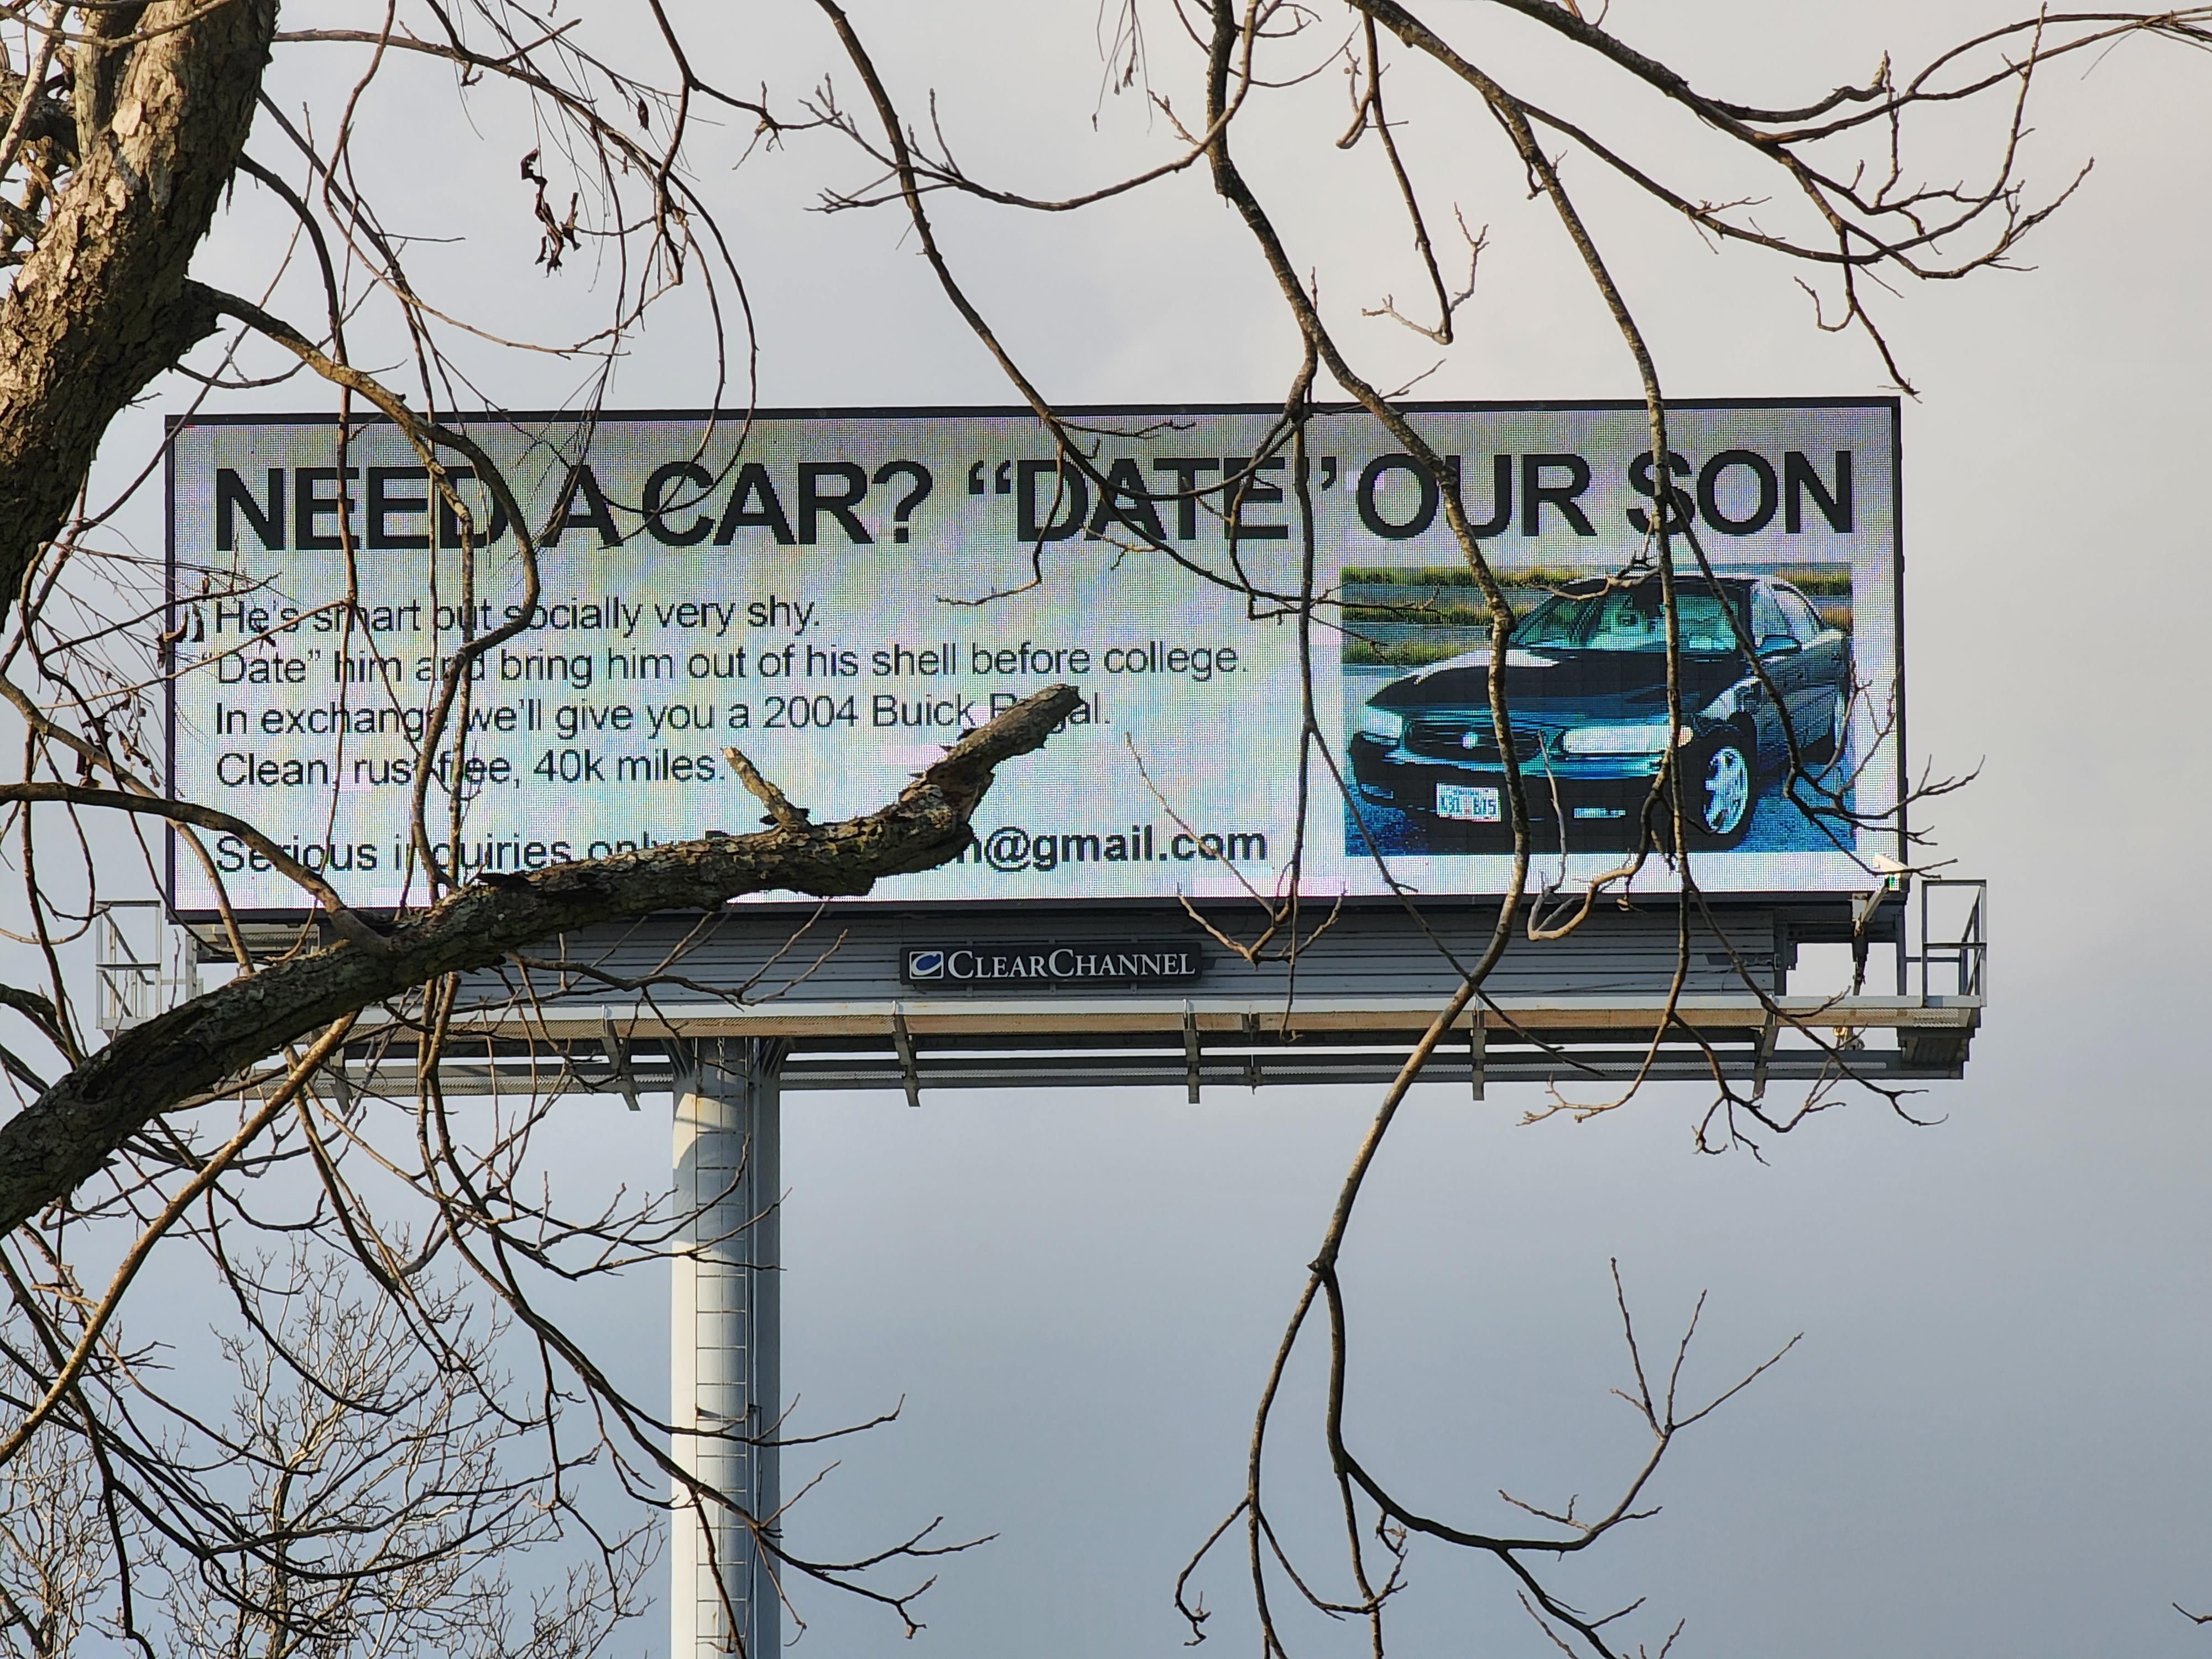 Billboard I saw on the way to work. I had to circle back just to be sure what I saw